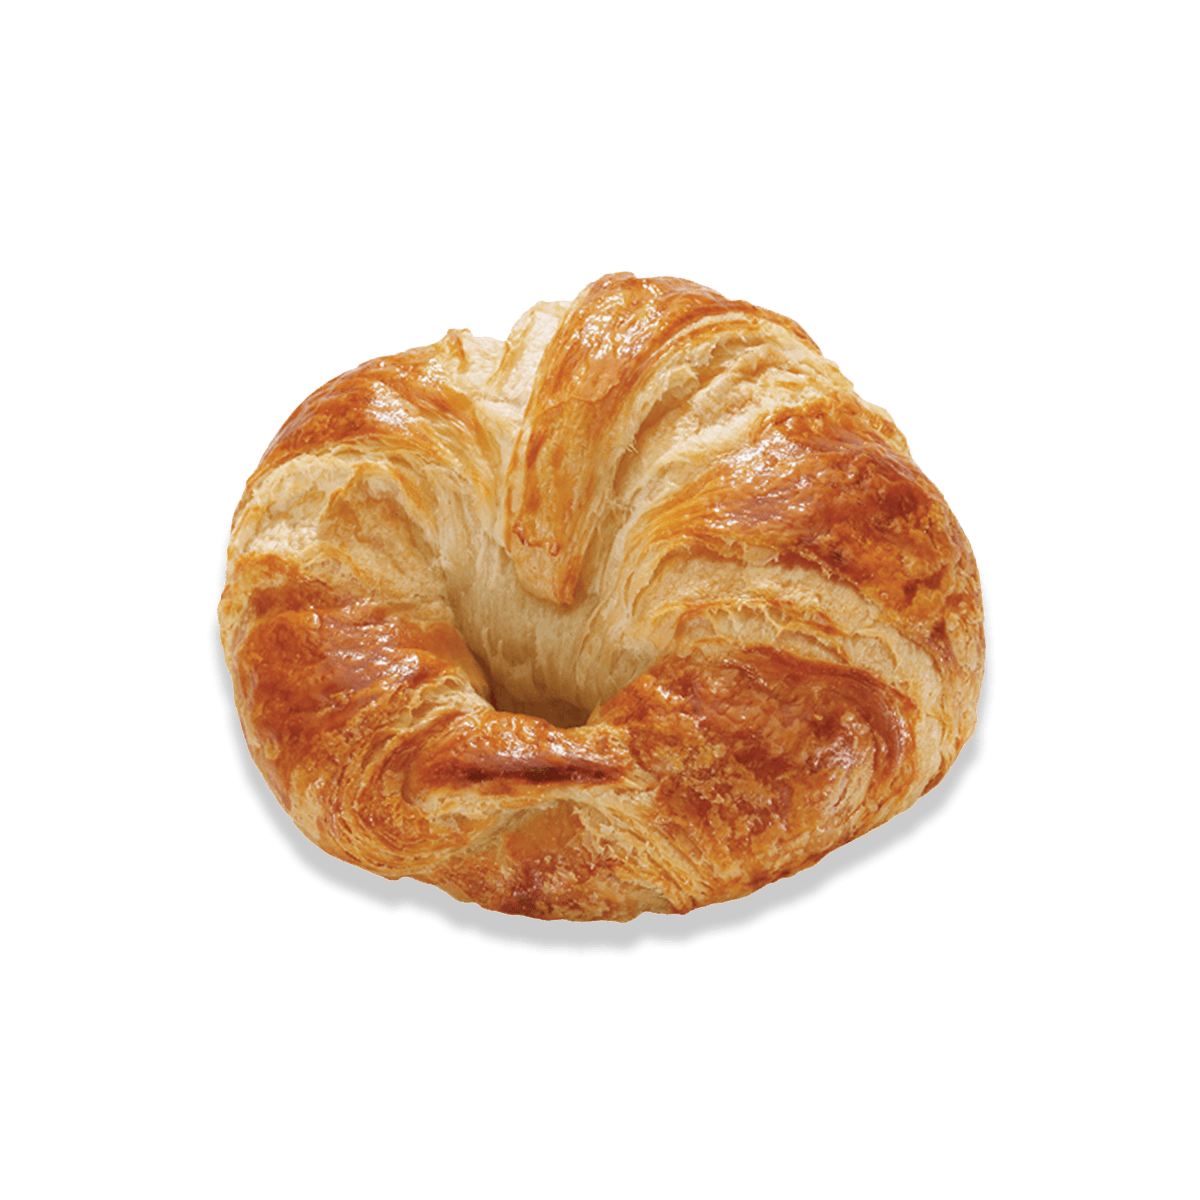 curved butter croissant on the side